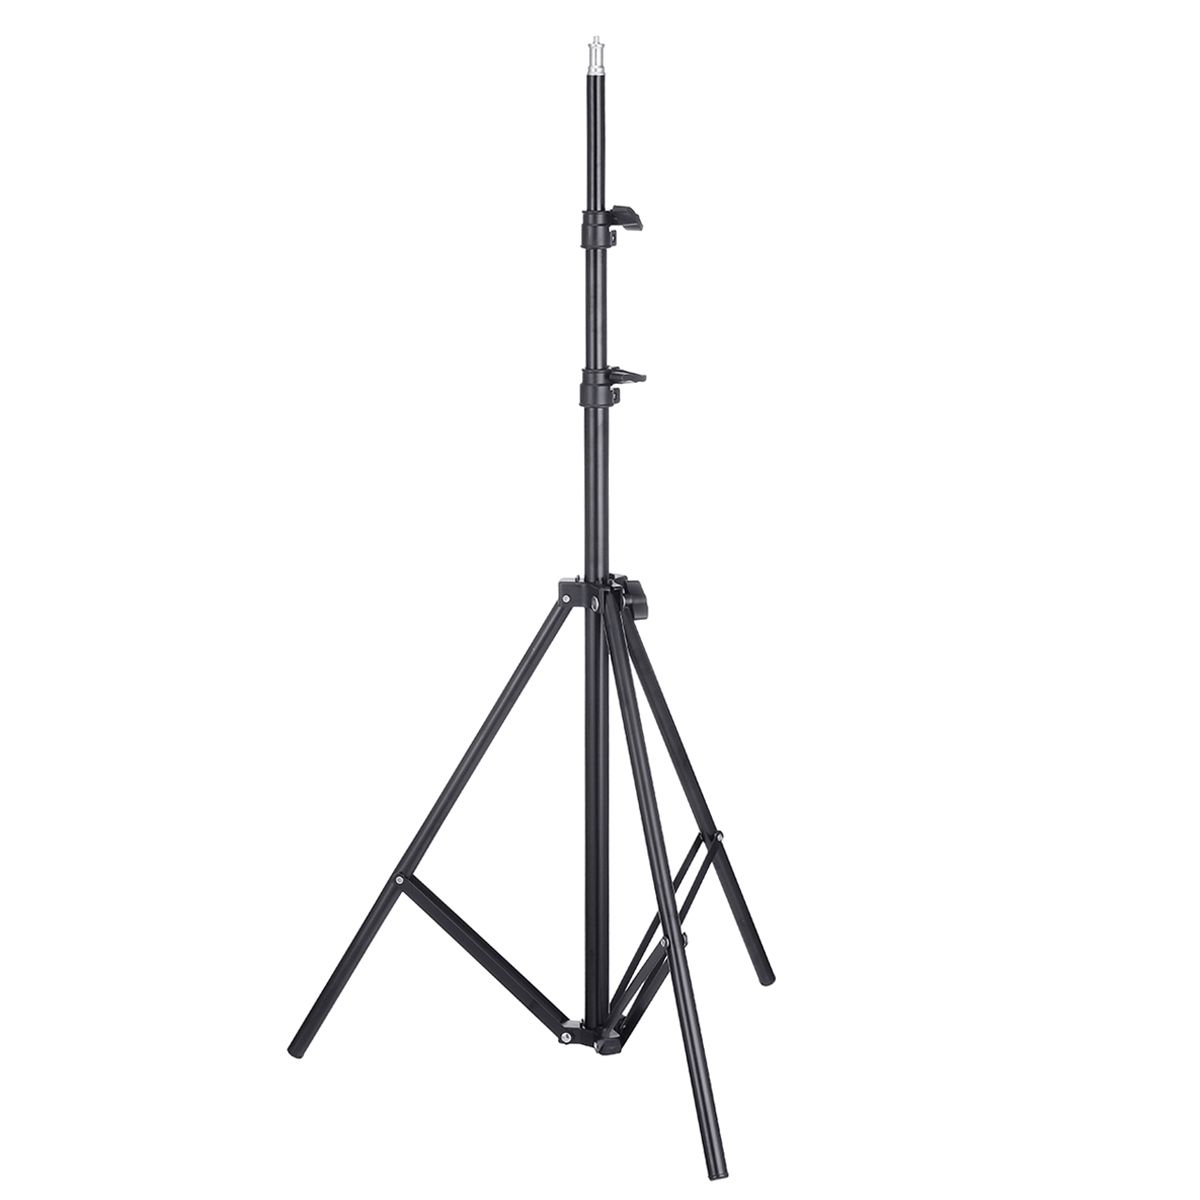 12-Inch-Dimmable-LED-Video-Ring-Light-with-Diffuser-Tripod-Stand-Holder-for-Youtube-Tik-Tok-Live-Str-1639911